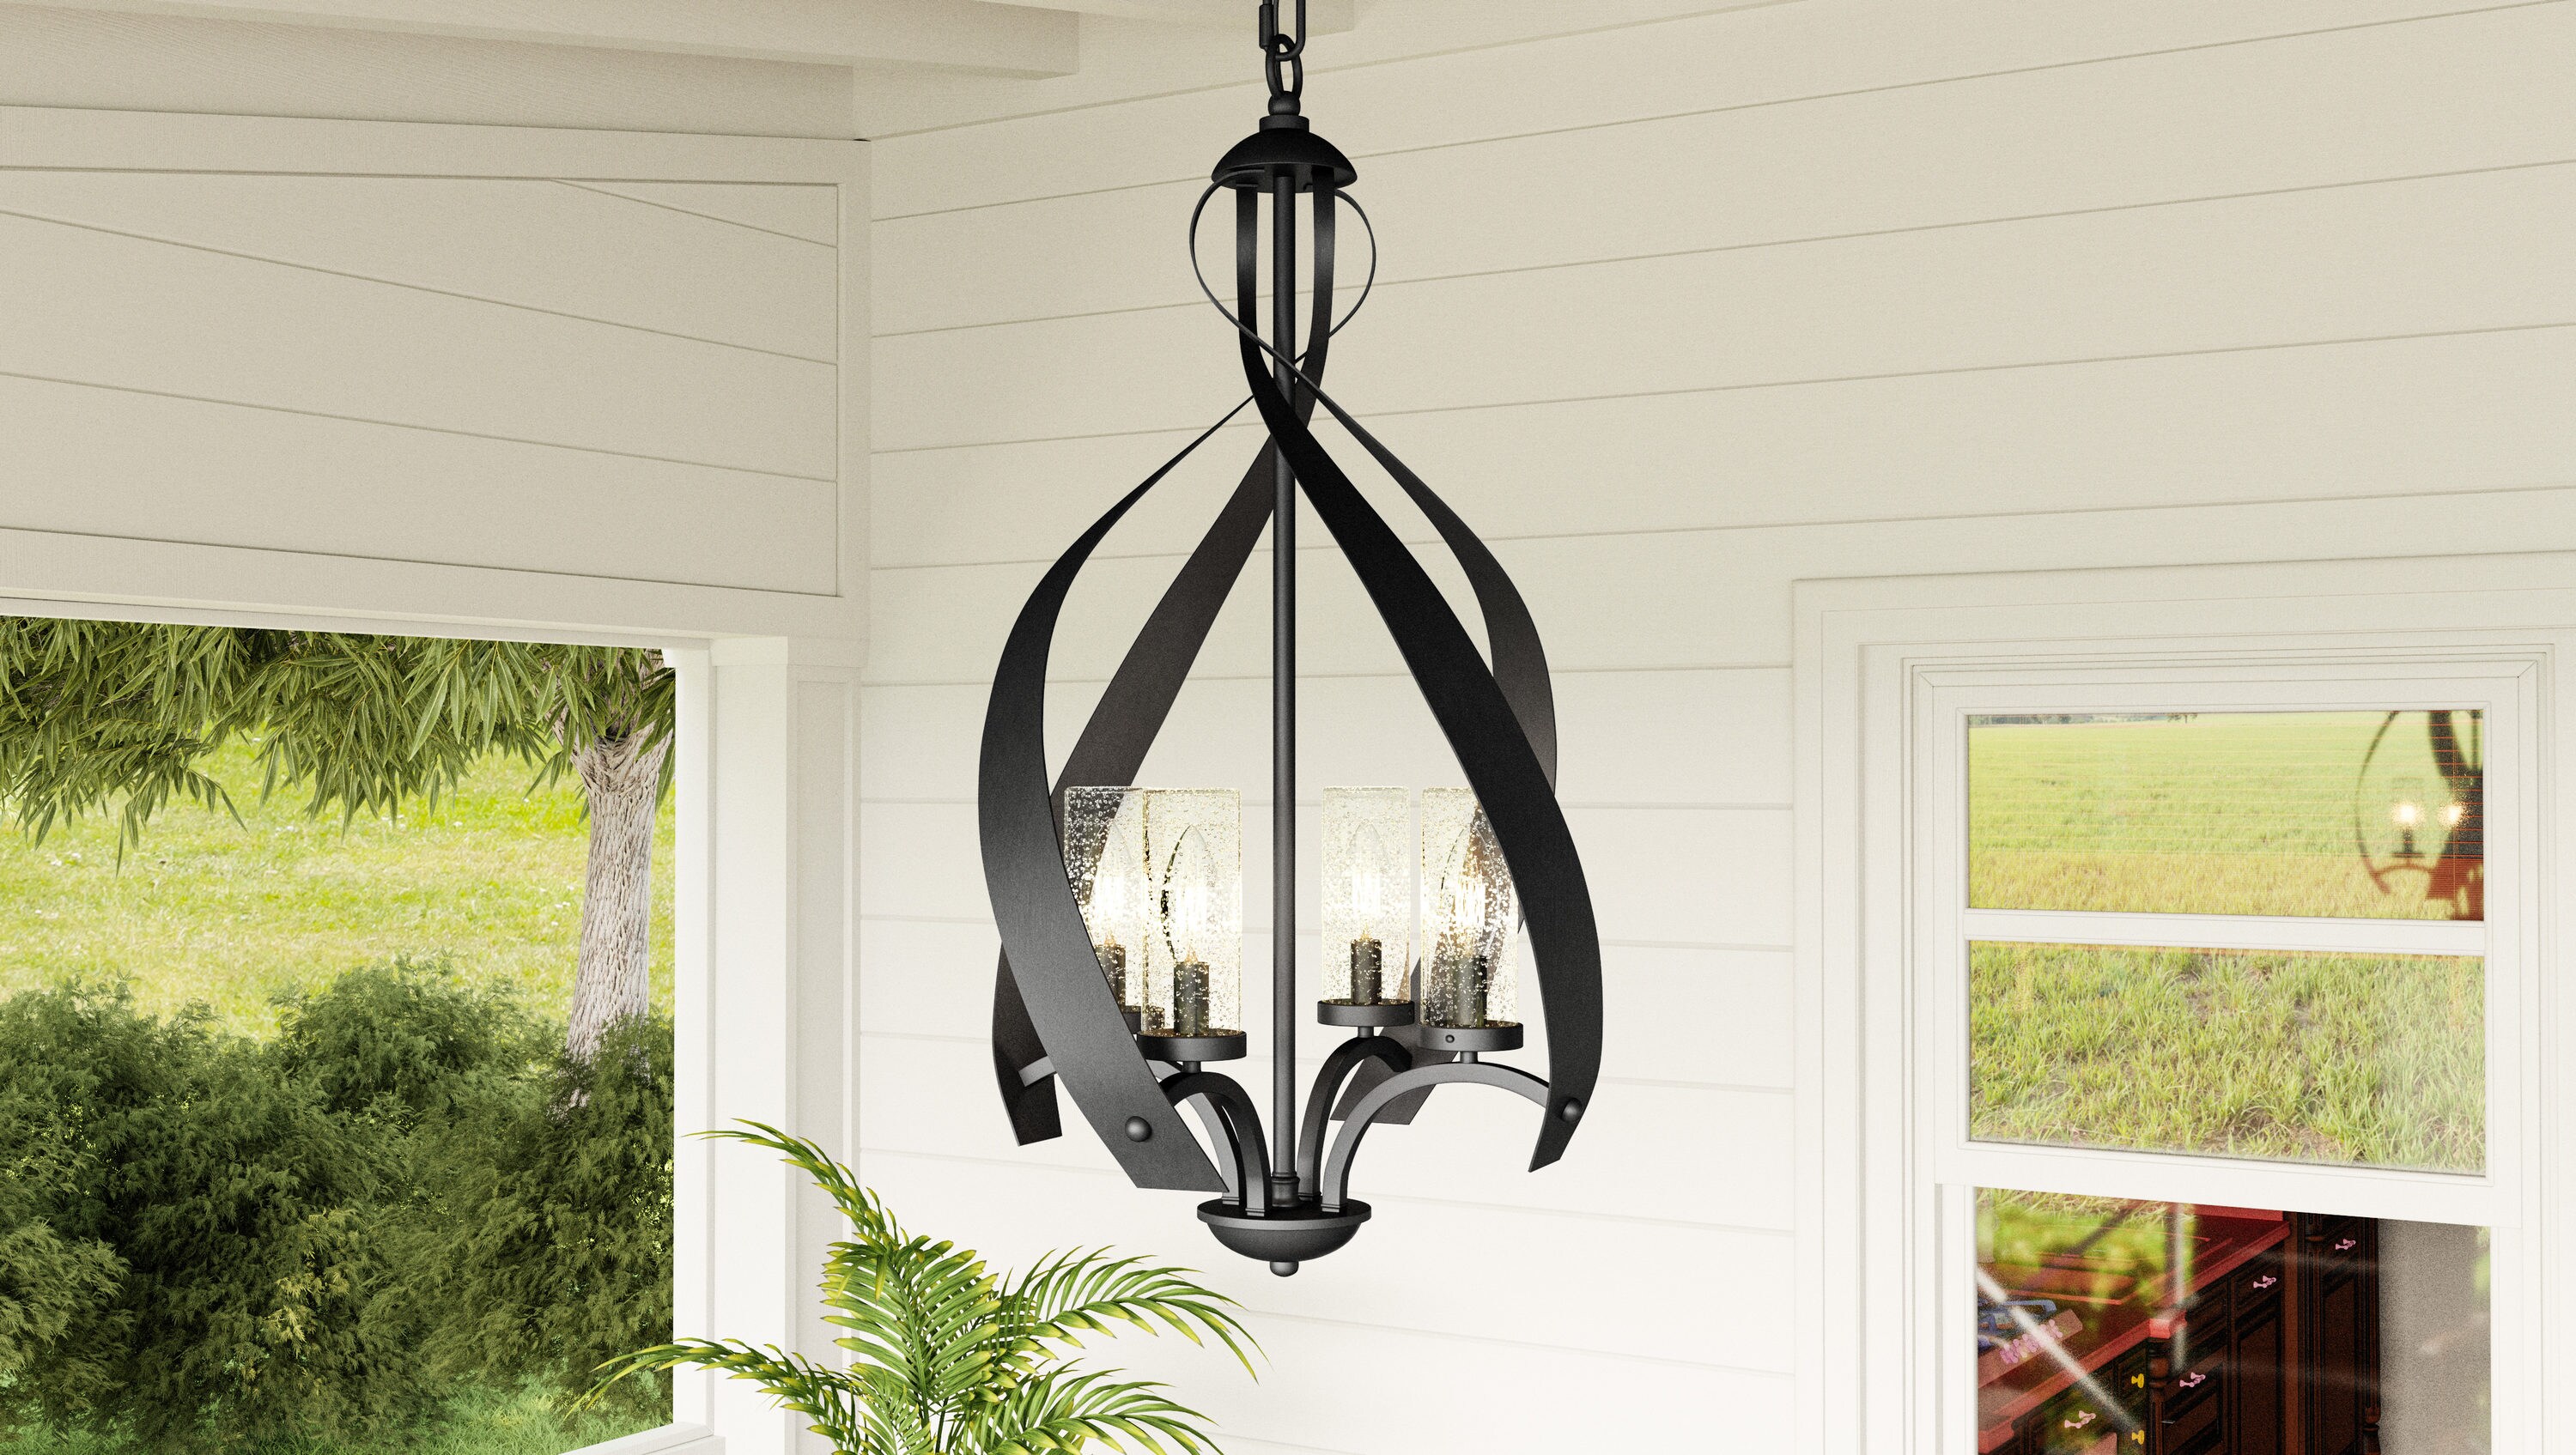 at the Glass Geometric Lars Pendant Outdoor in Black Quoizel Lighting Light Pendant Clear Transitional 4-Light Hanging department